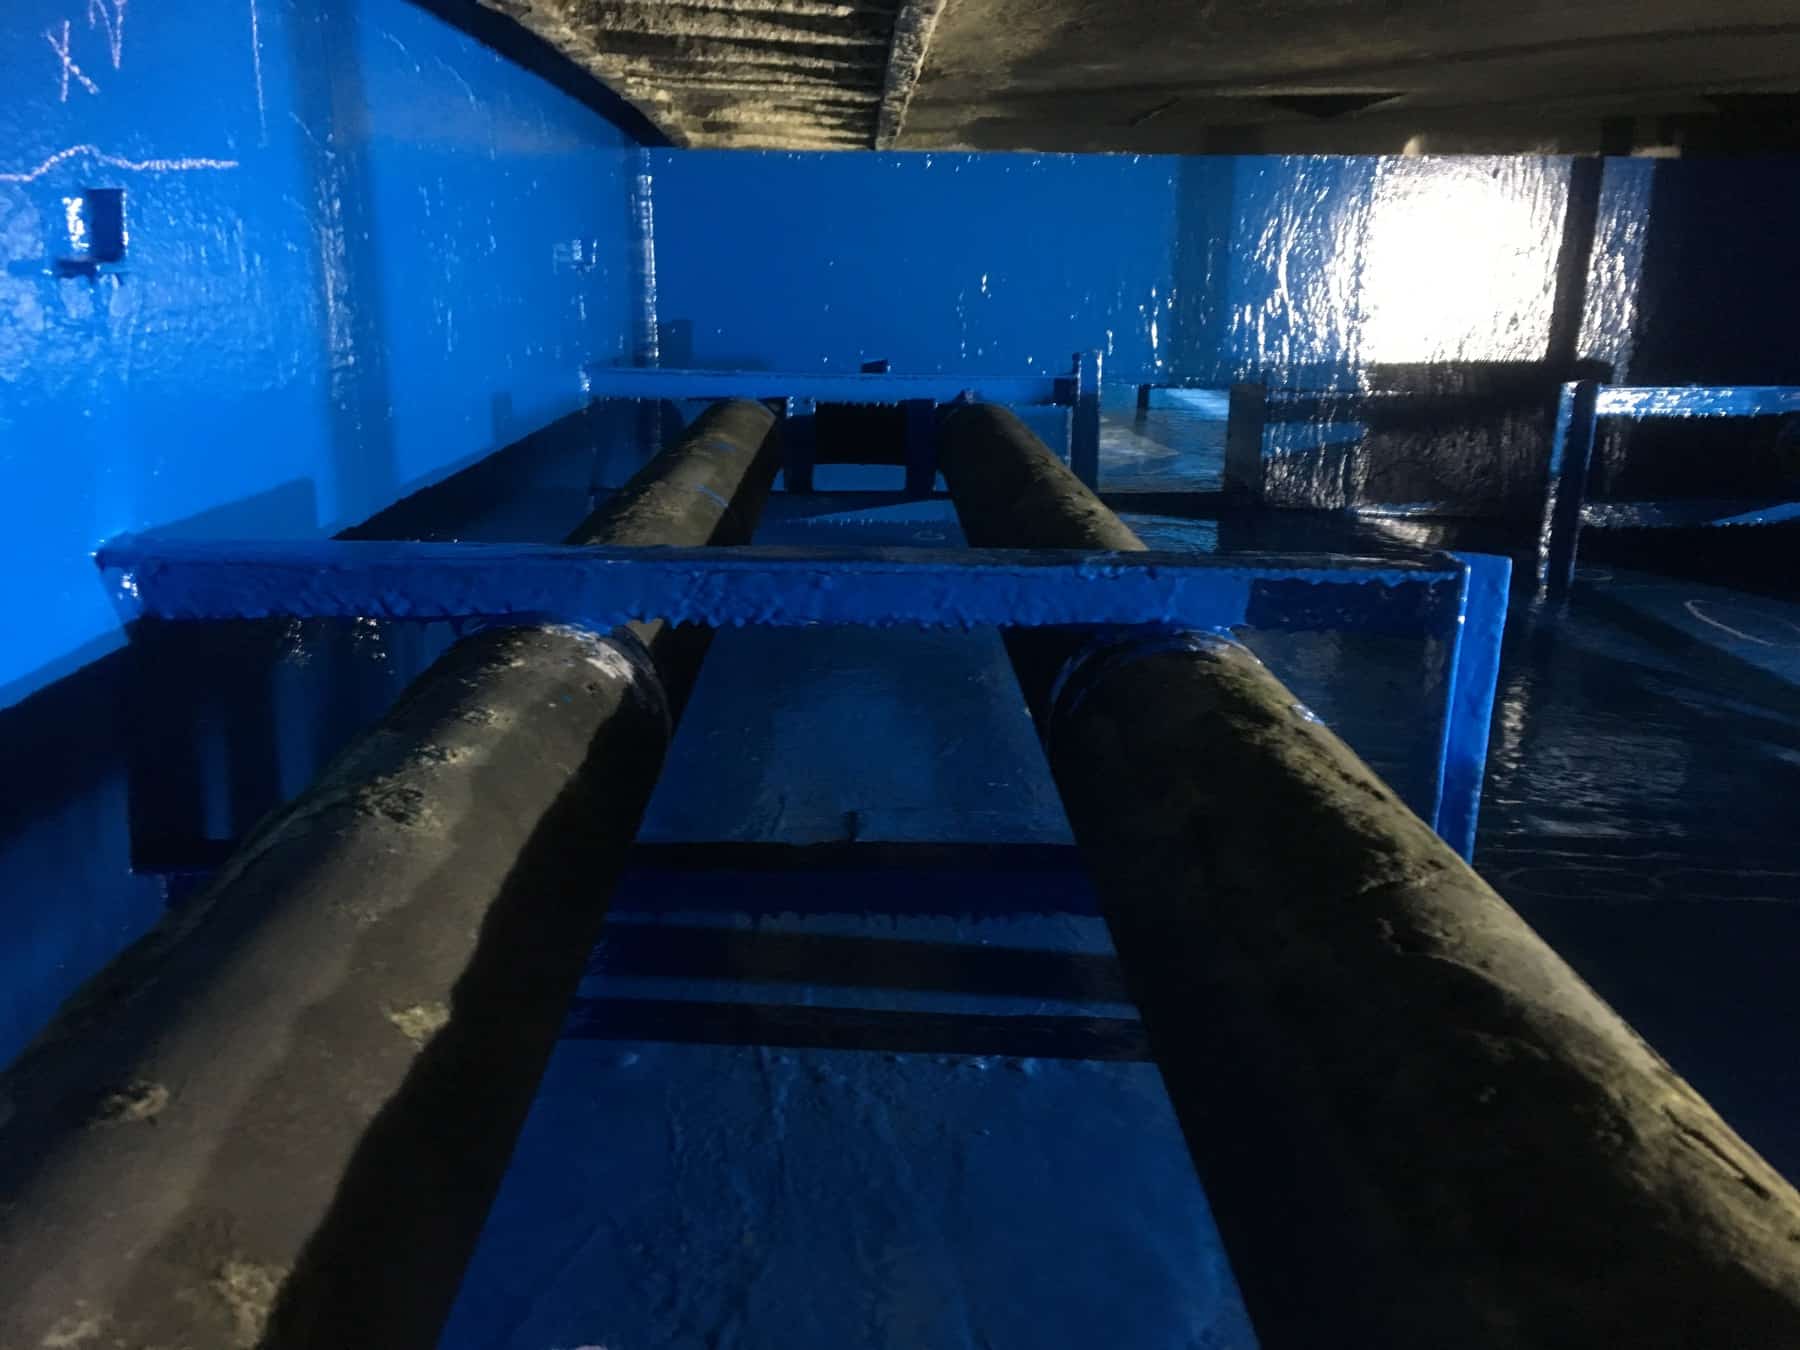 process tank painted in blue with two large unpainted pipes